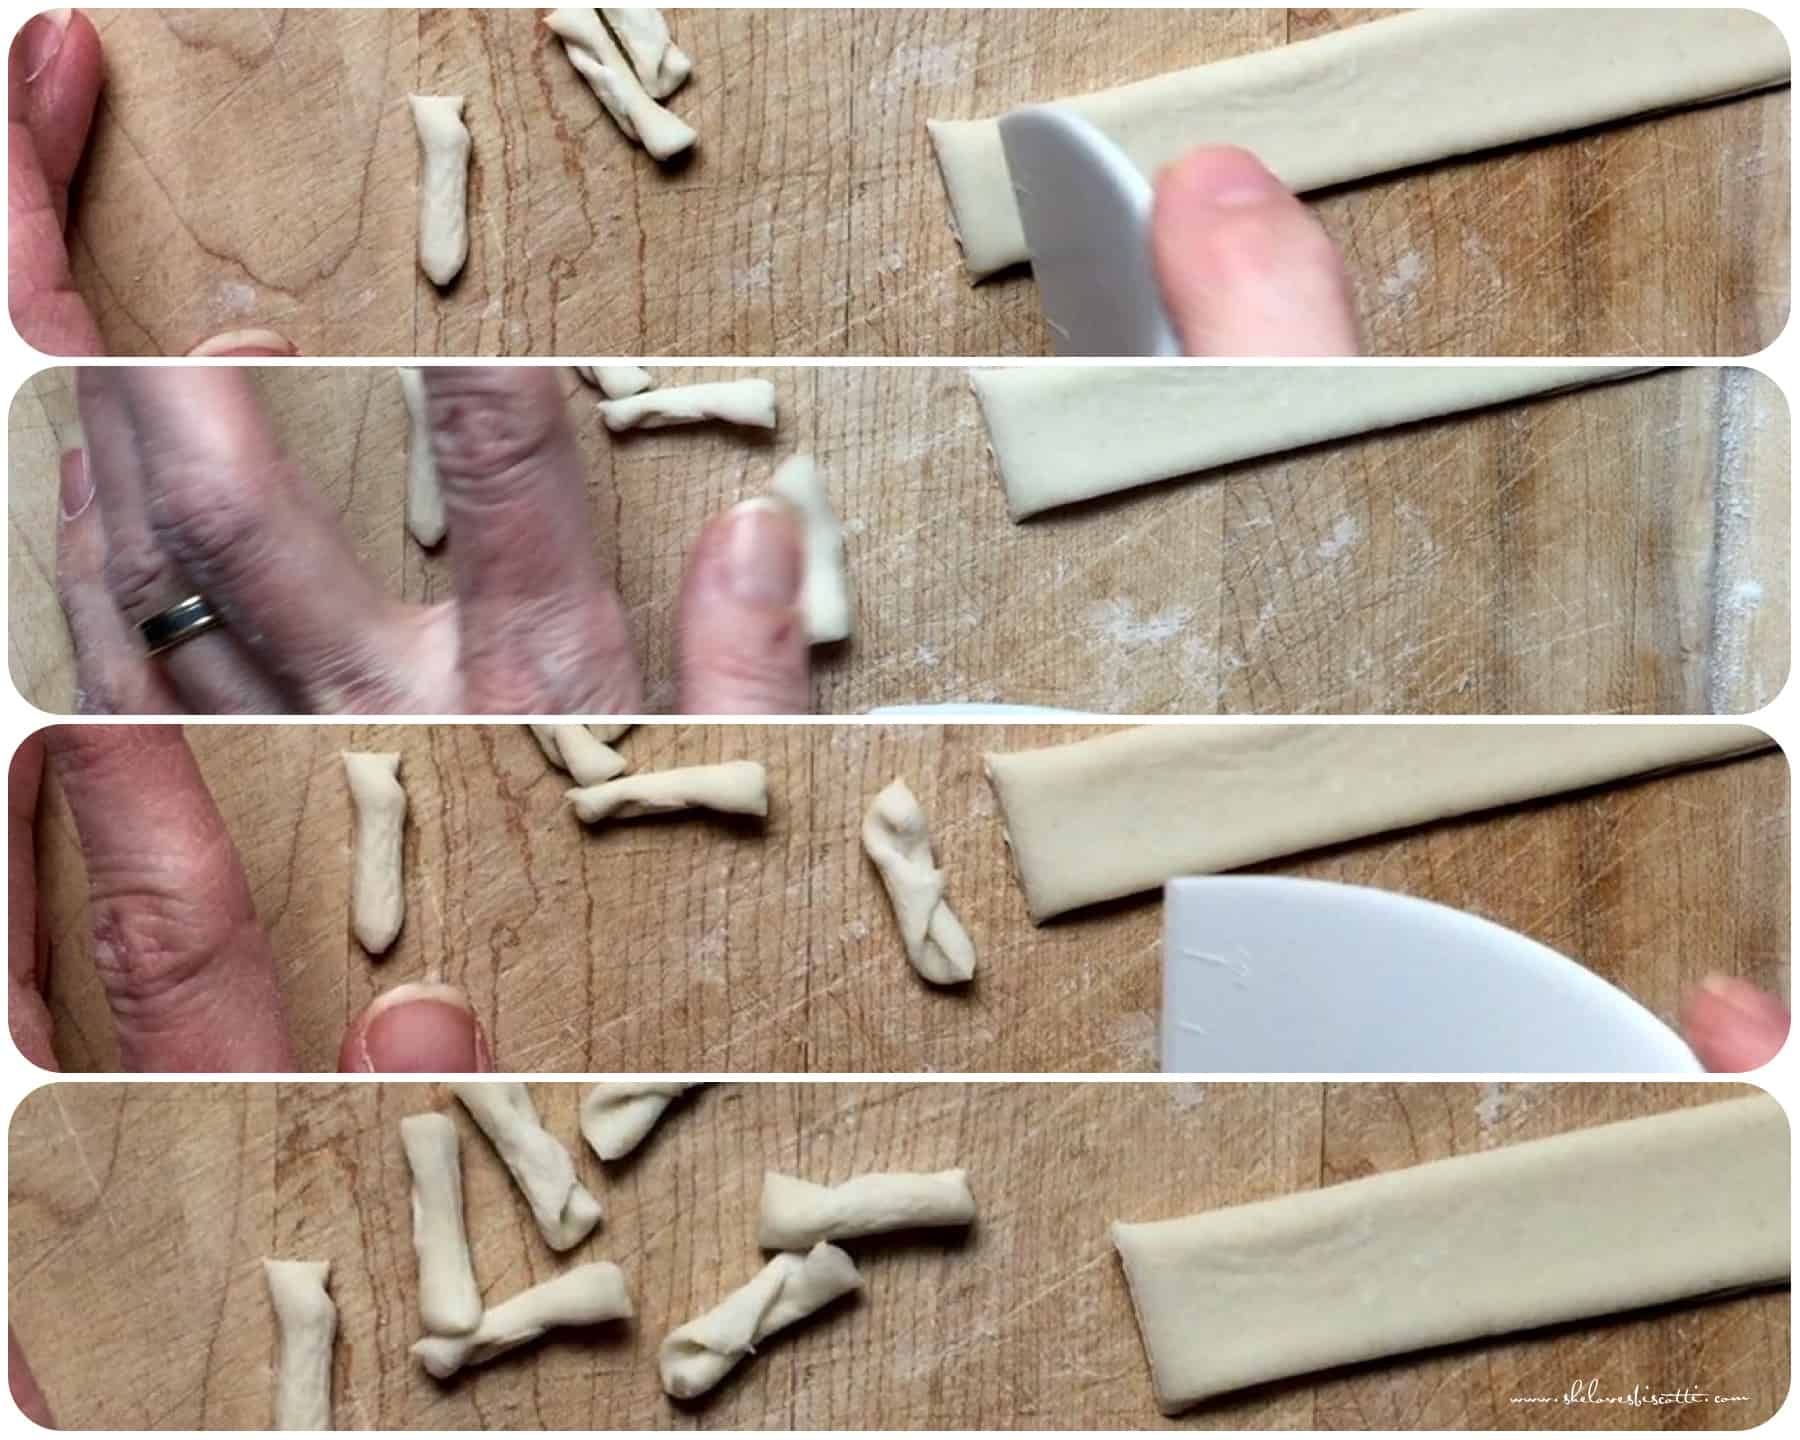 Step by step photo tutorial on how to shape cavatelli.